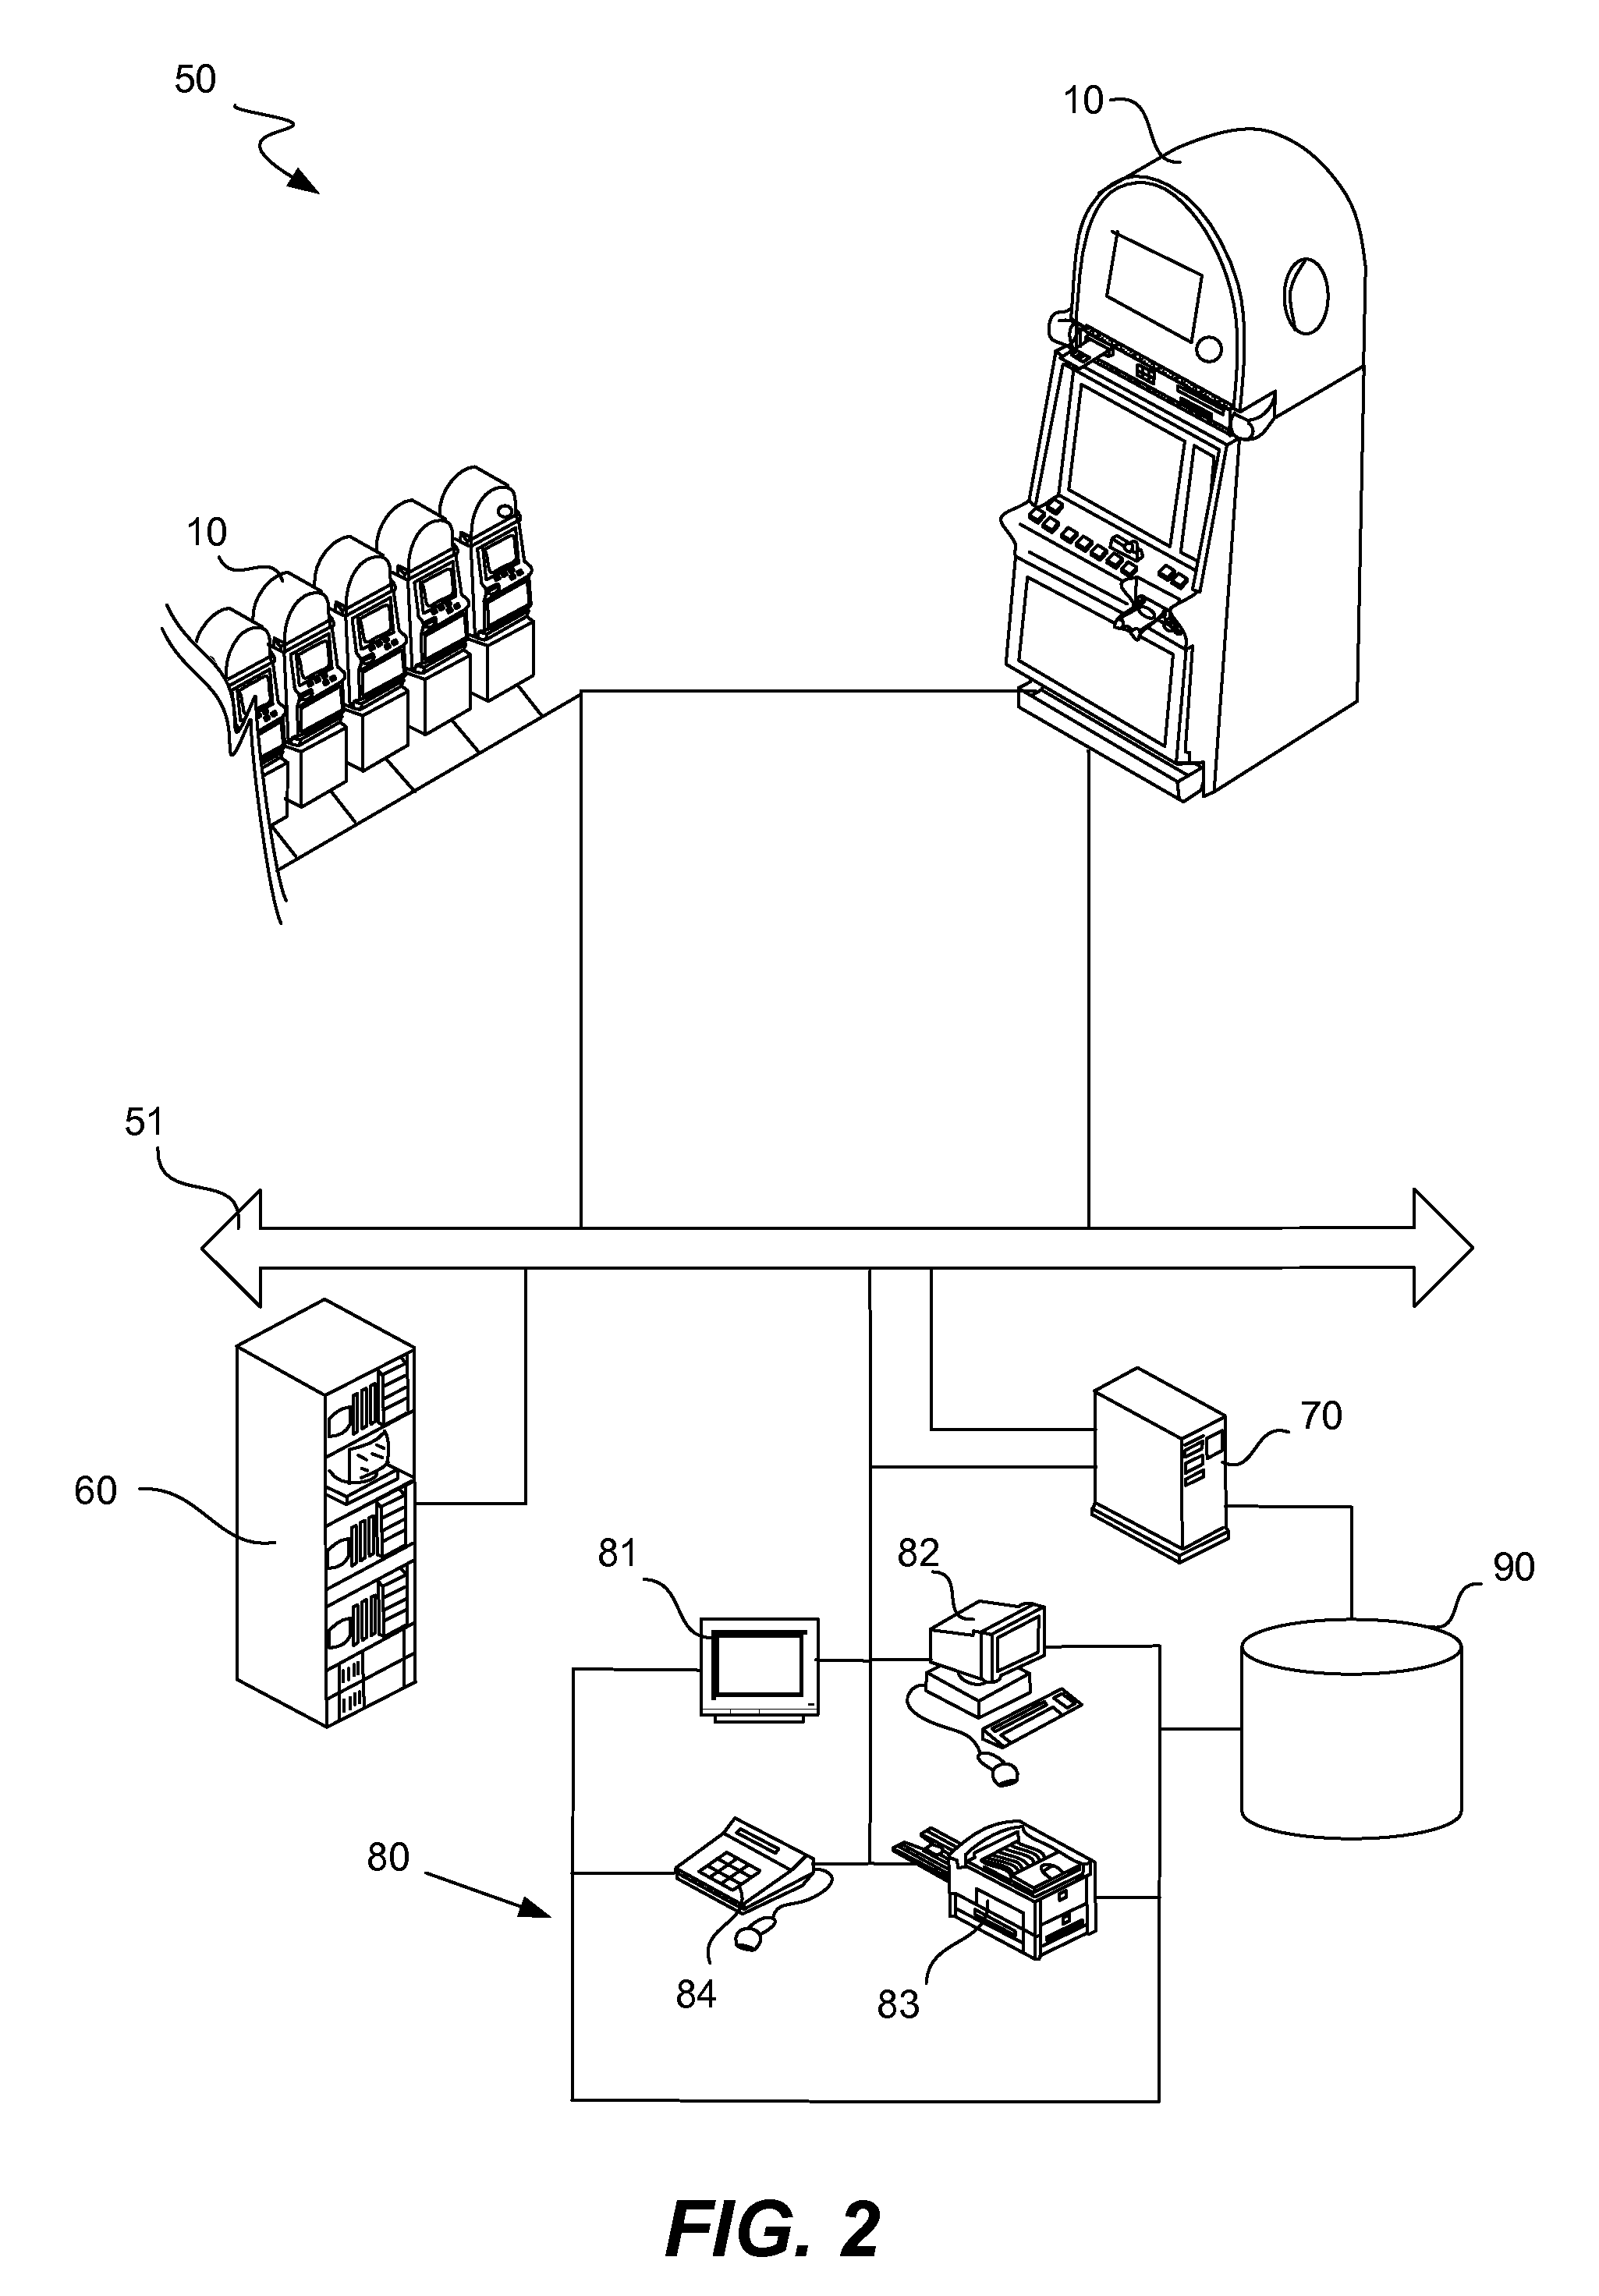 Systems and methods for improving a button assembly